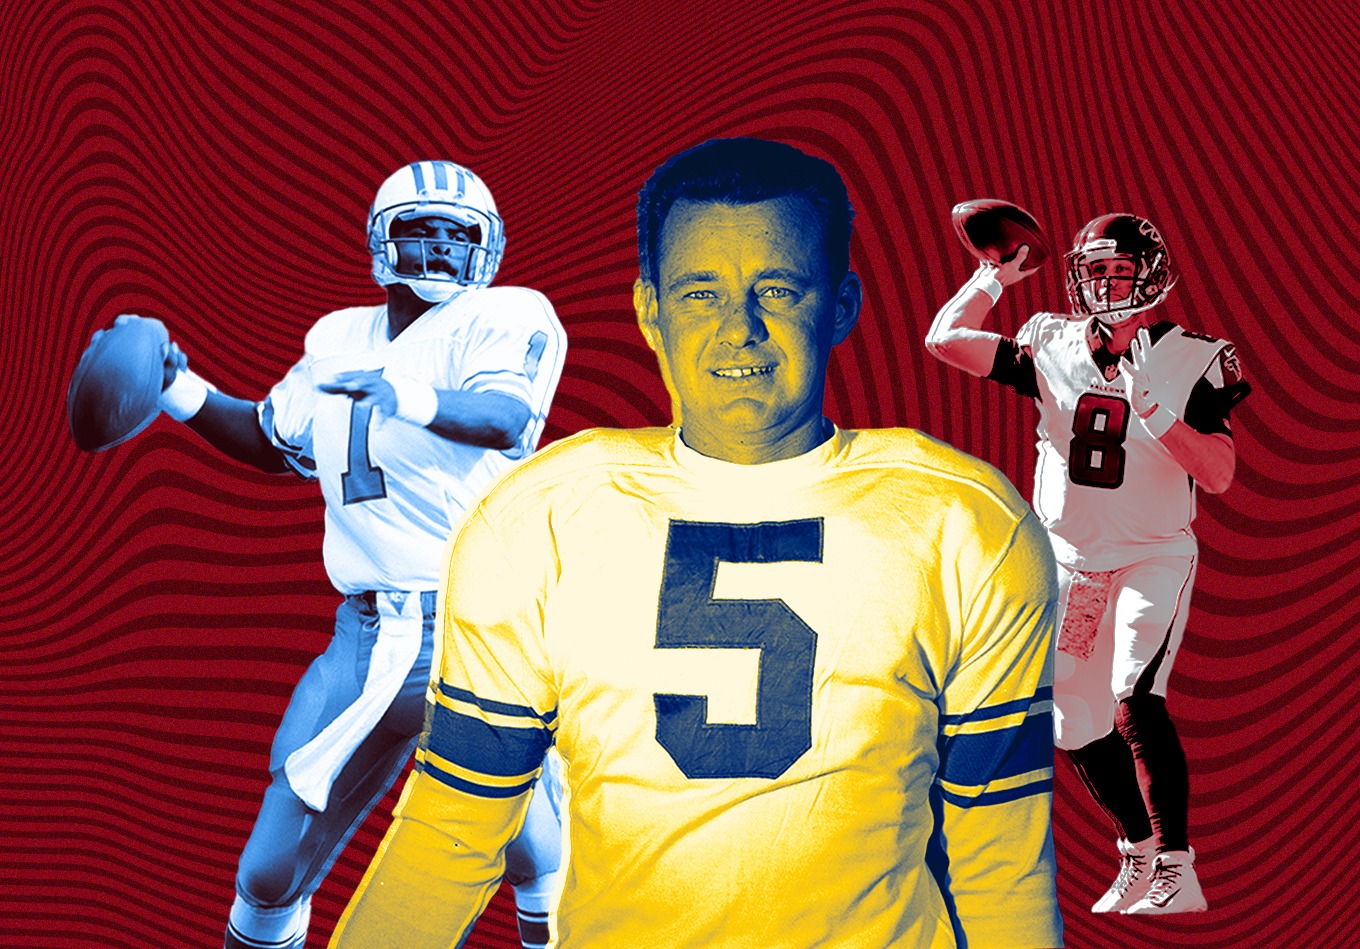 Airing It Out: The Games With the Most Passing Yards in NFL History